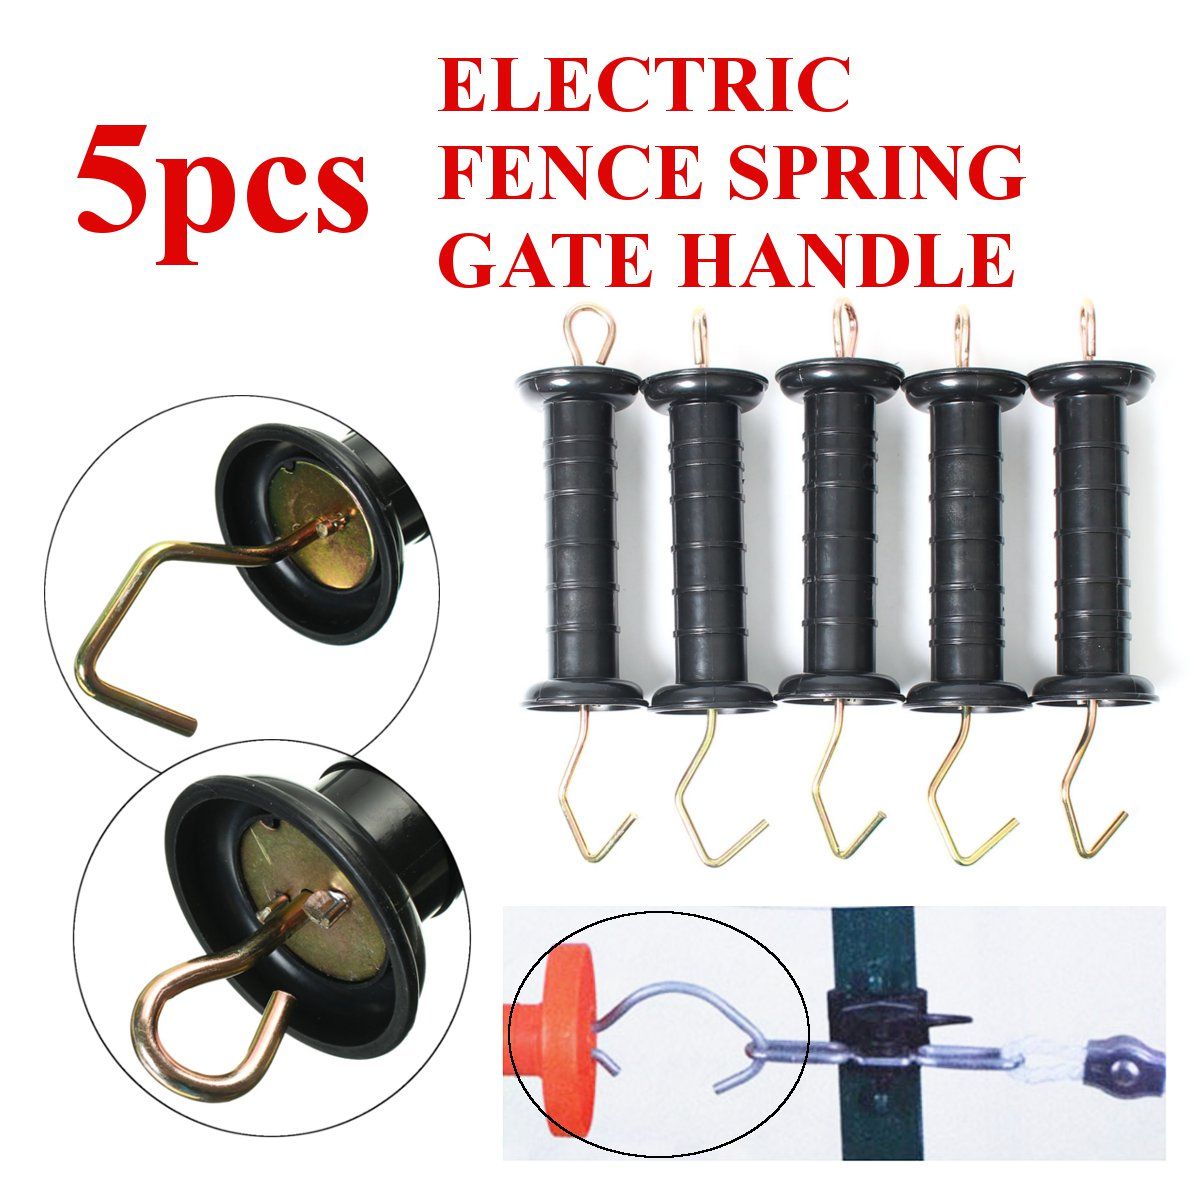 5Pcs-Electric-Fence-Spring-Gate-Handles-Ranch-Fence-Accessories-1161177